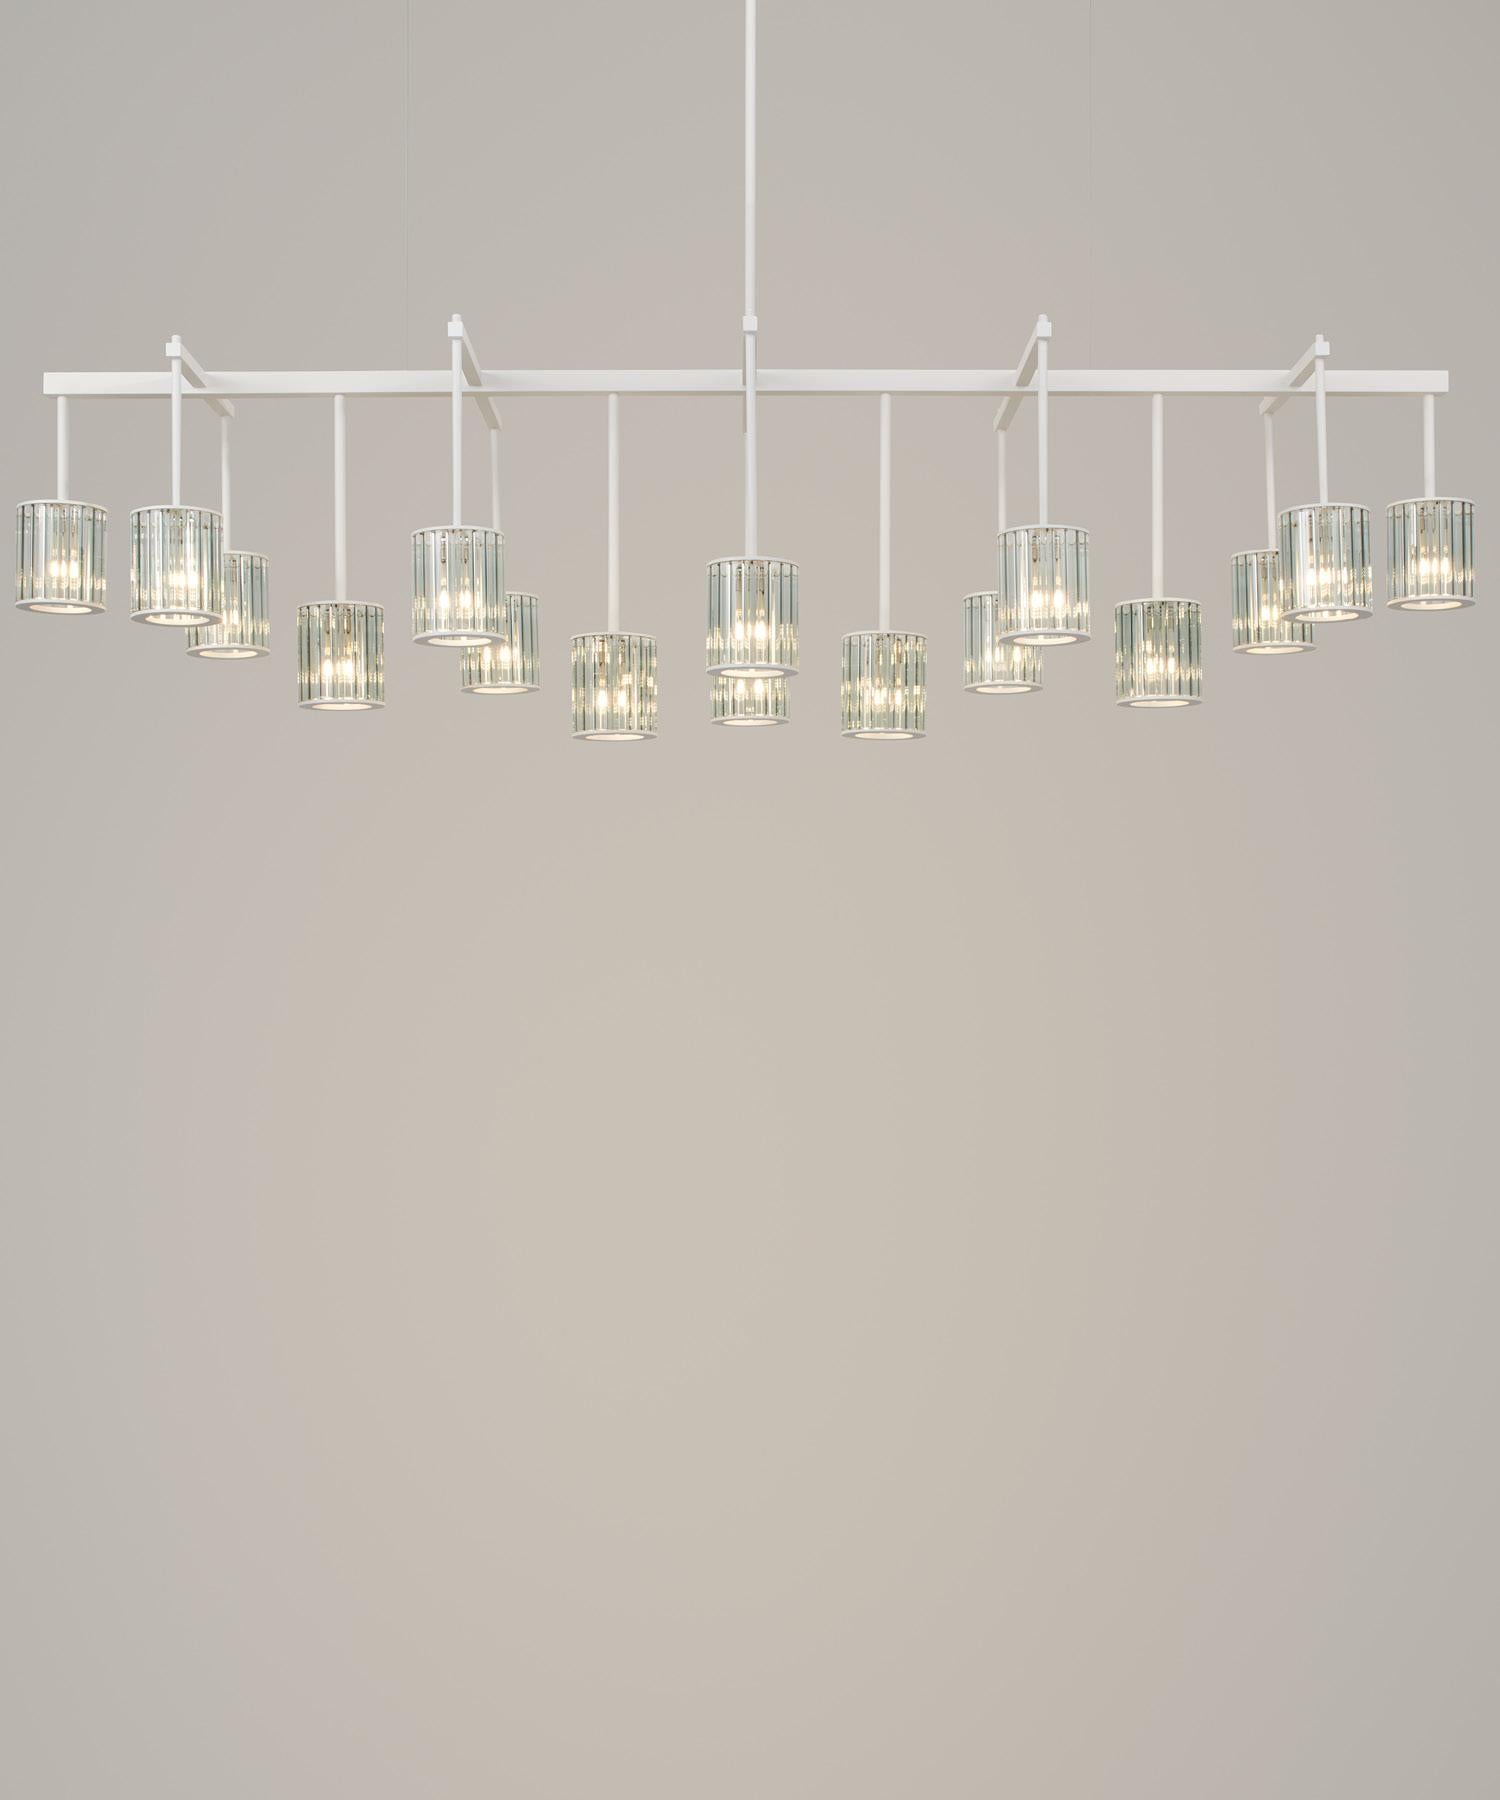 The largest member of the Flute family, the Flute Beam Chandelier is available in two standard sizes and is perfectly suited to formal dining areas and living spaces. The textured powder coat or rich, brushed-brass finish can be combined with the